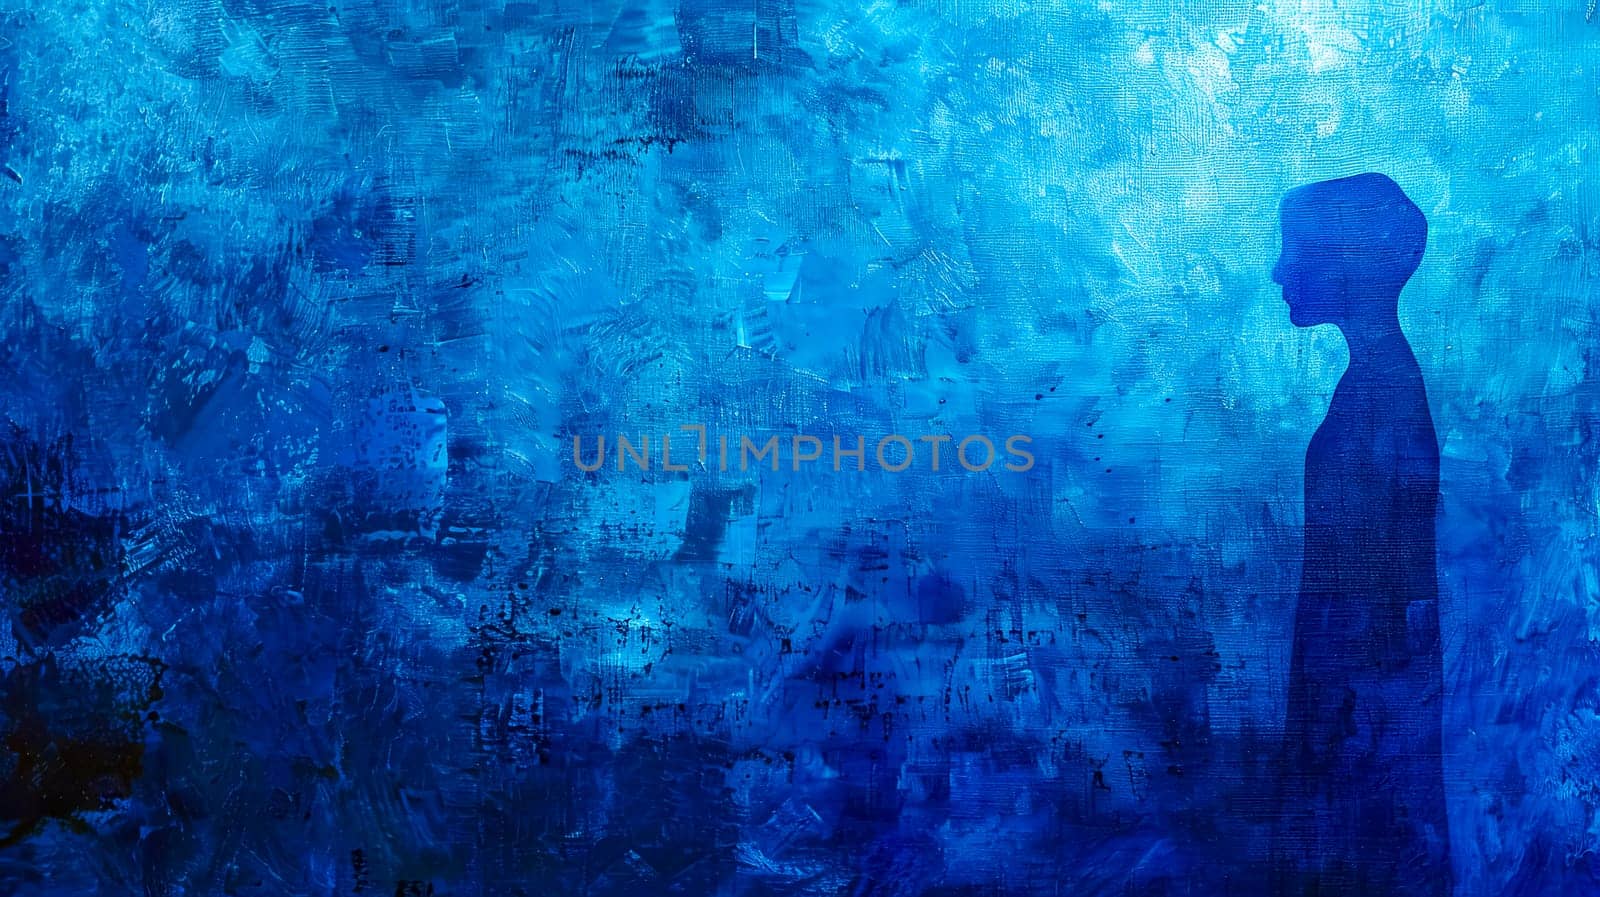 Silhouette on blue abstract art background, copy space by Edophoto